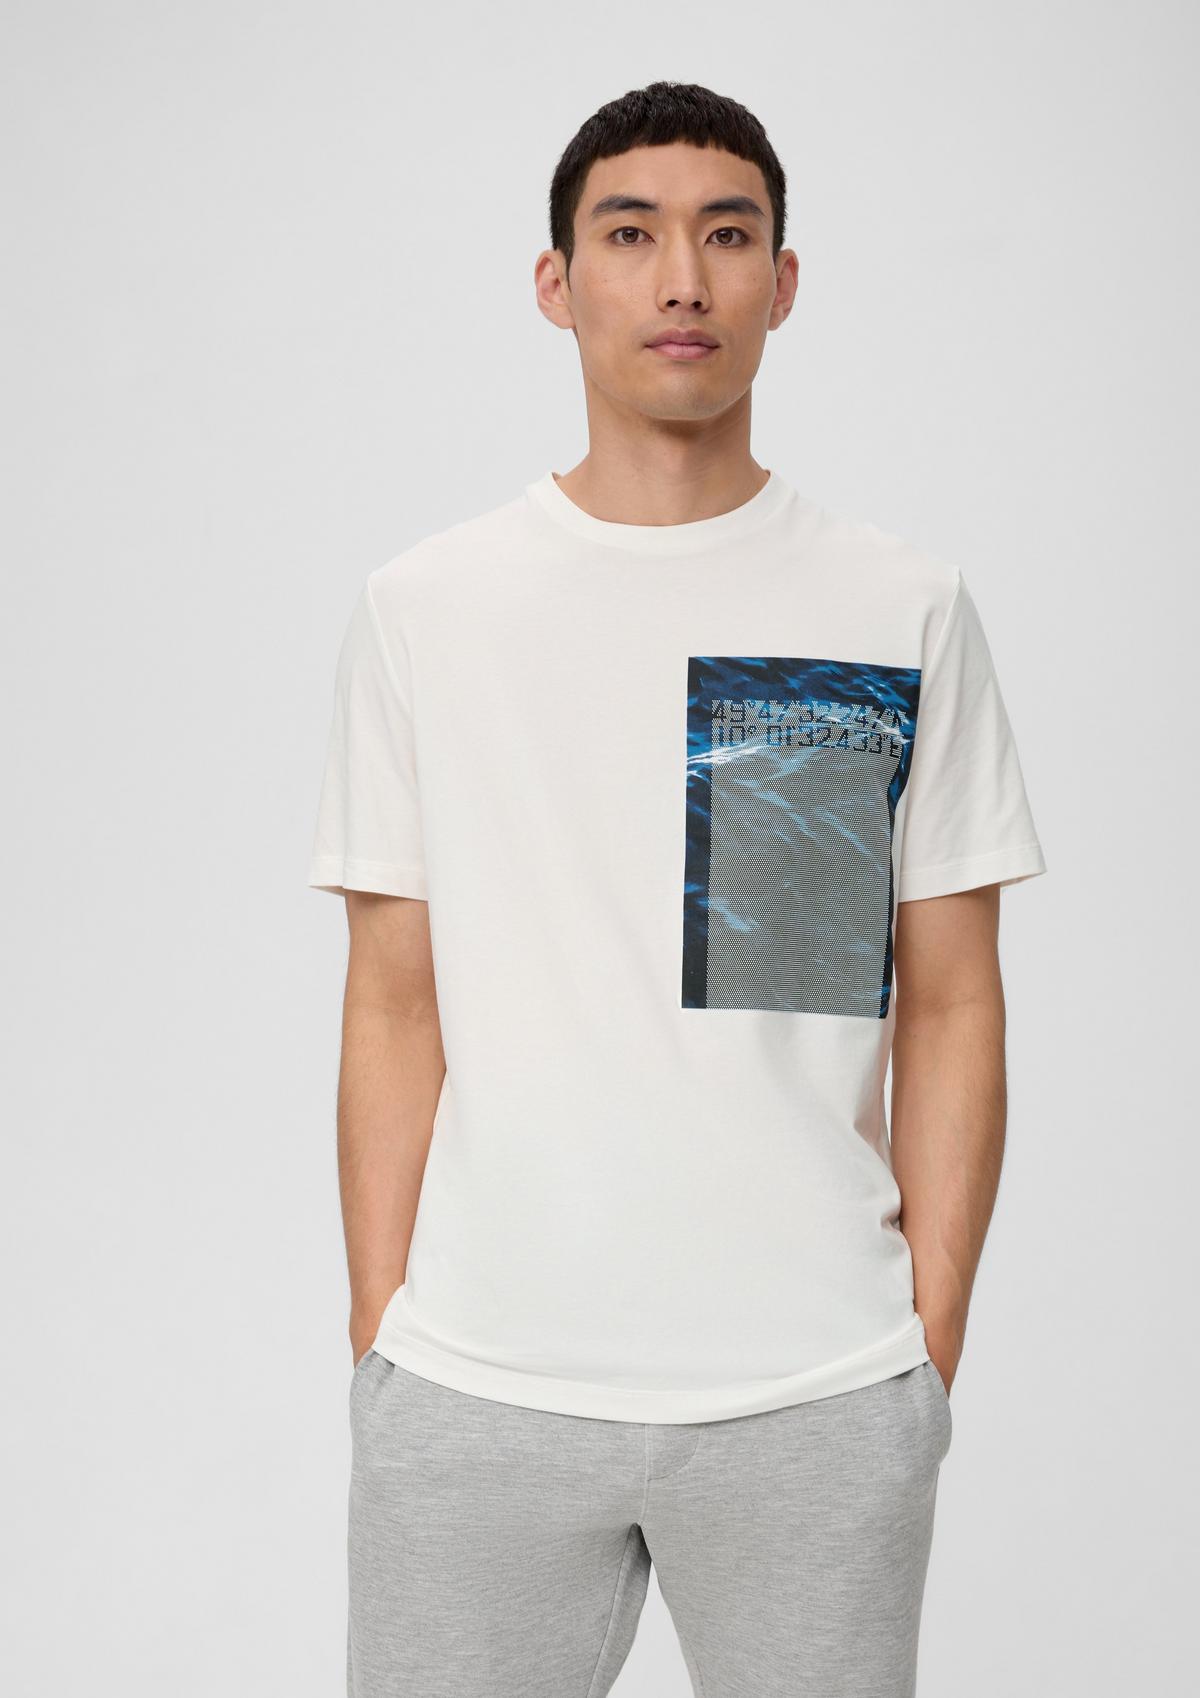 Printed T-shirt in white cotton stretch 